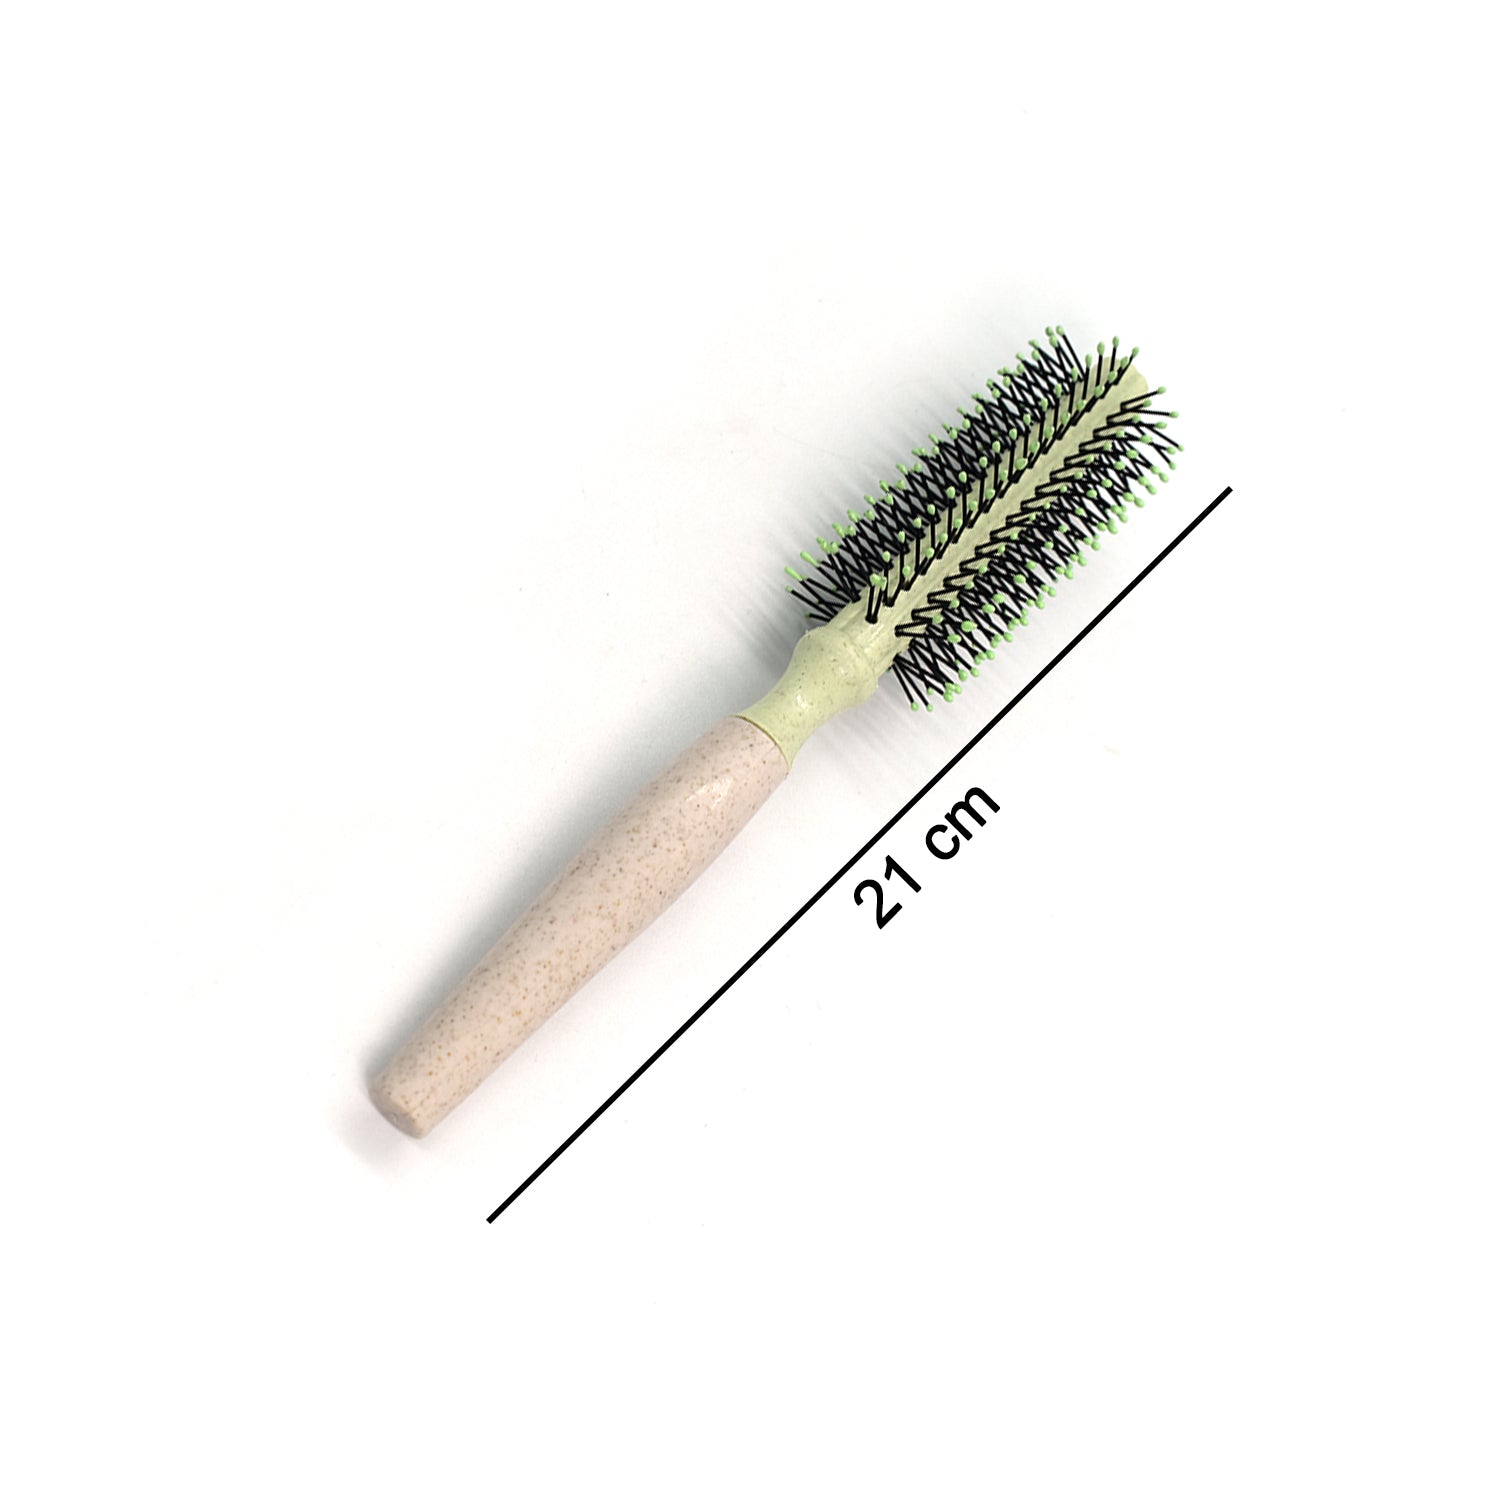 6191 Round Hair Brush For Blow Drying & Hair Styling 